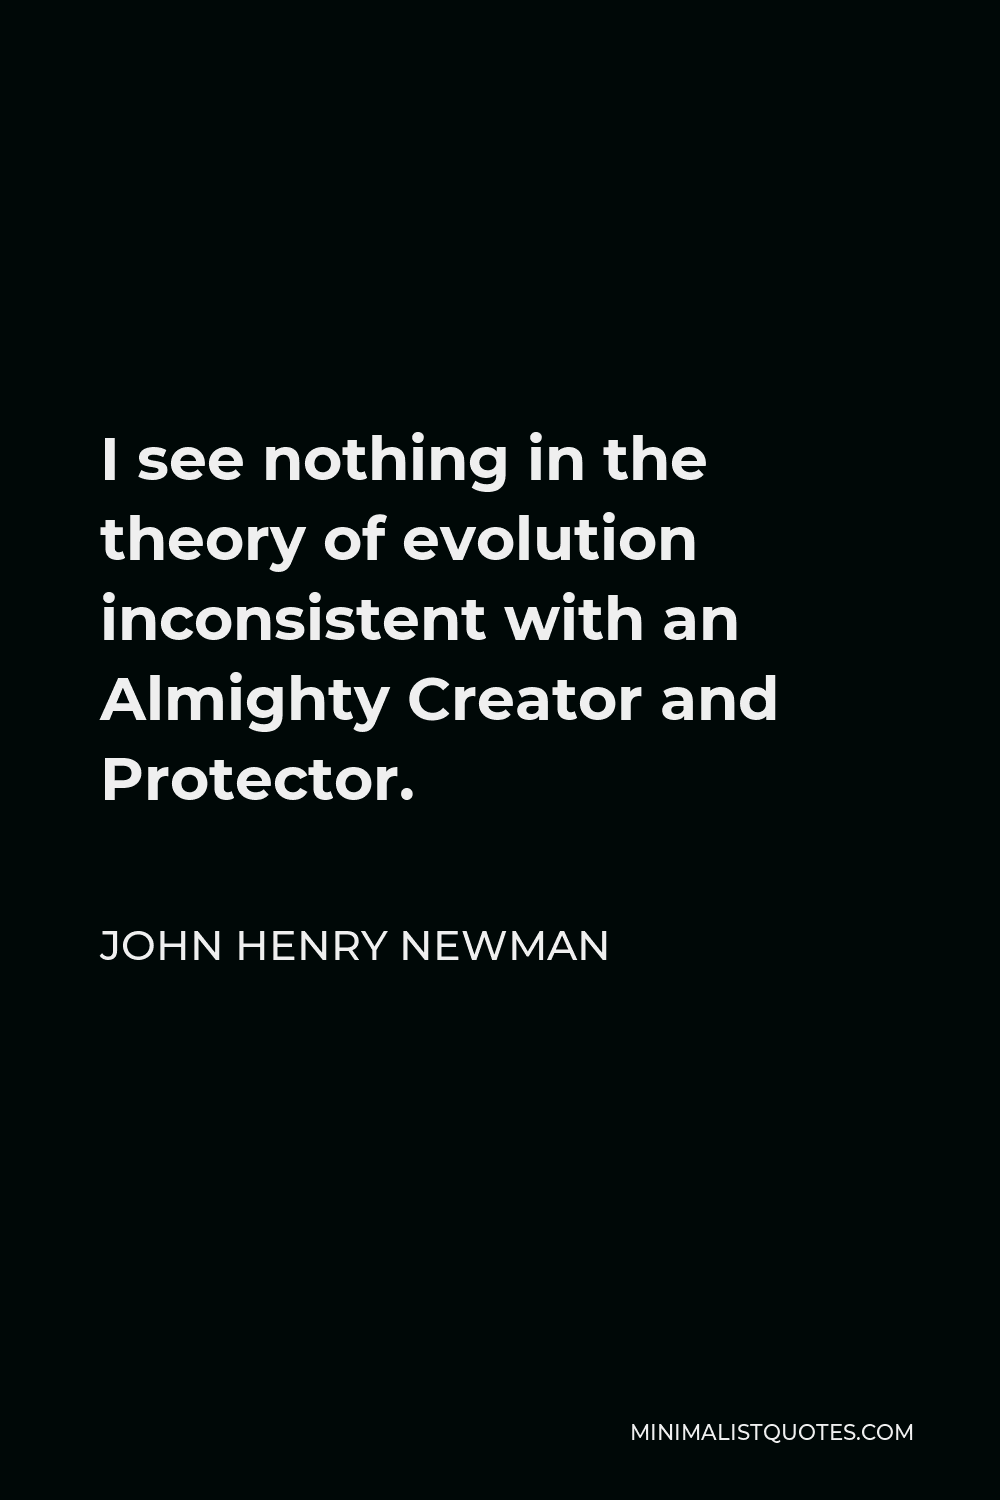 John Henry Newman Quote - I see nothing in the theory of evolution inconsistent with an Almighty Creator and Protector.